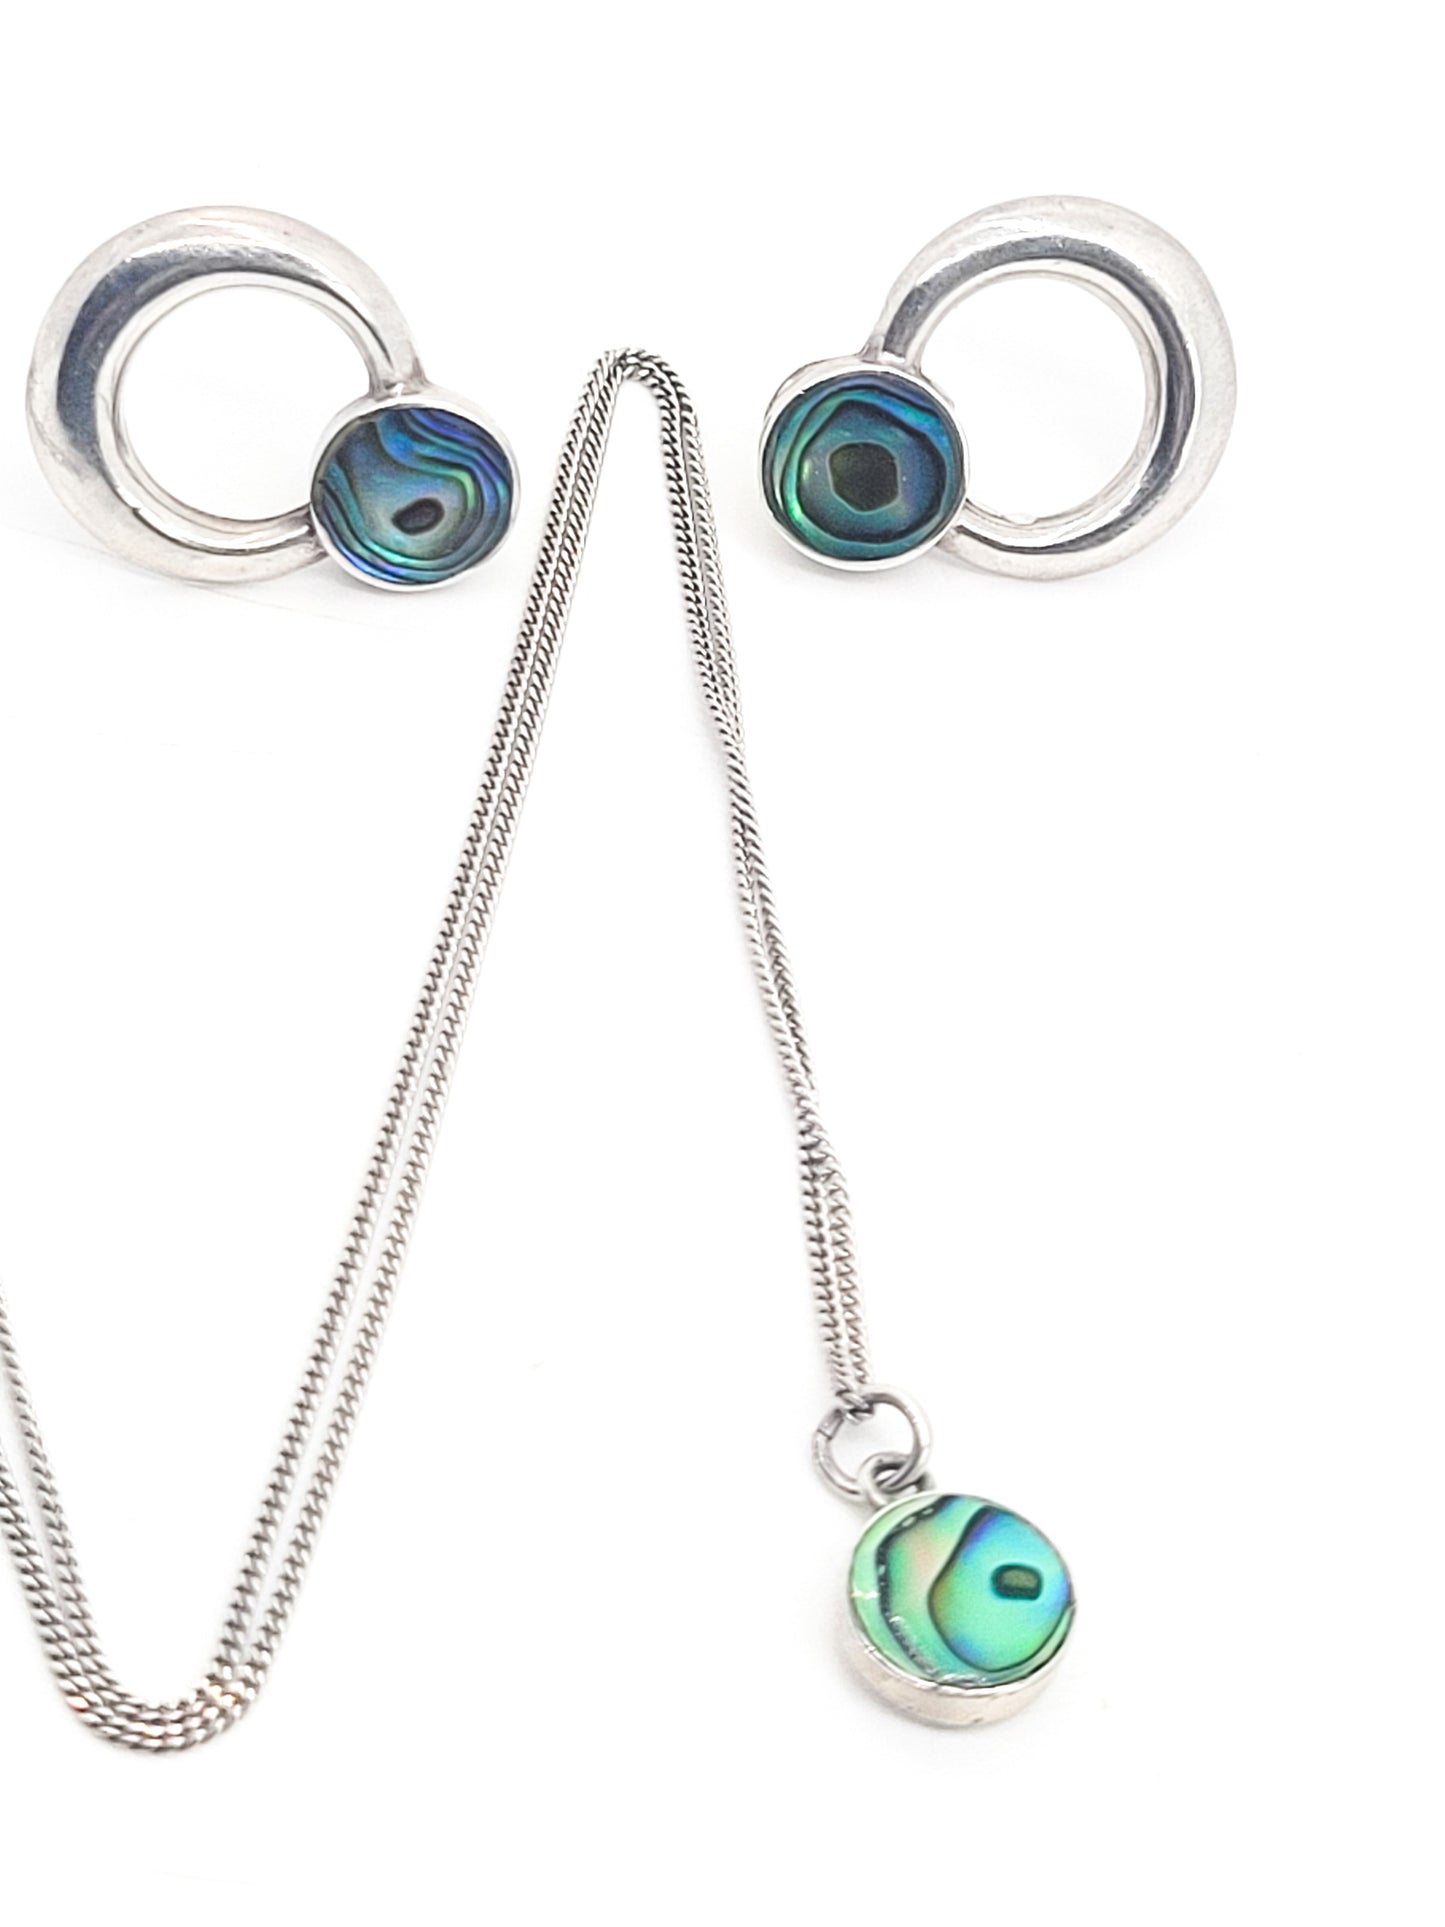 STG Abalone Paua shell sterling silver hoop earrings and pendant necklace set